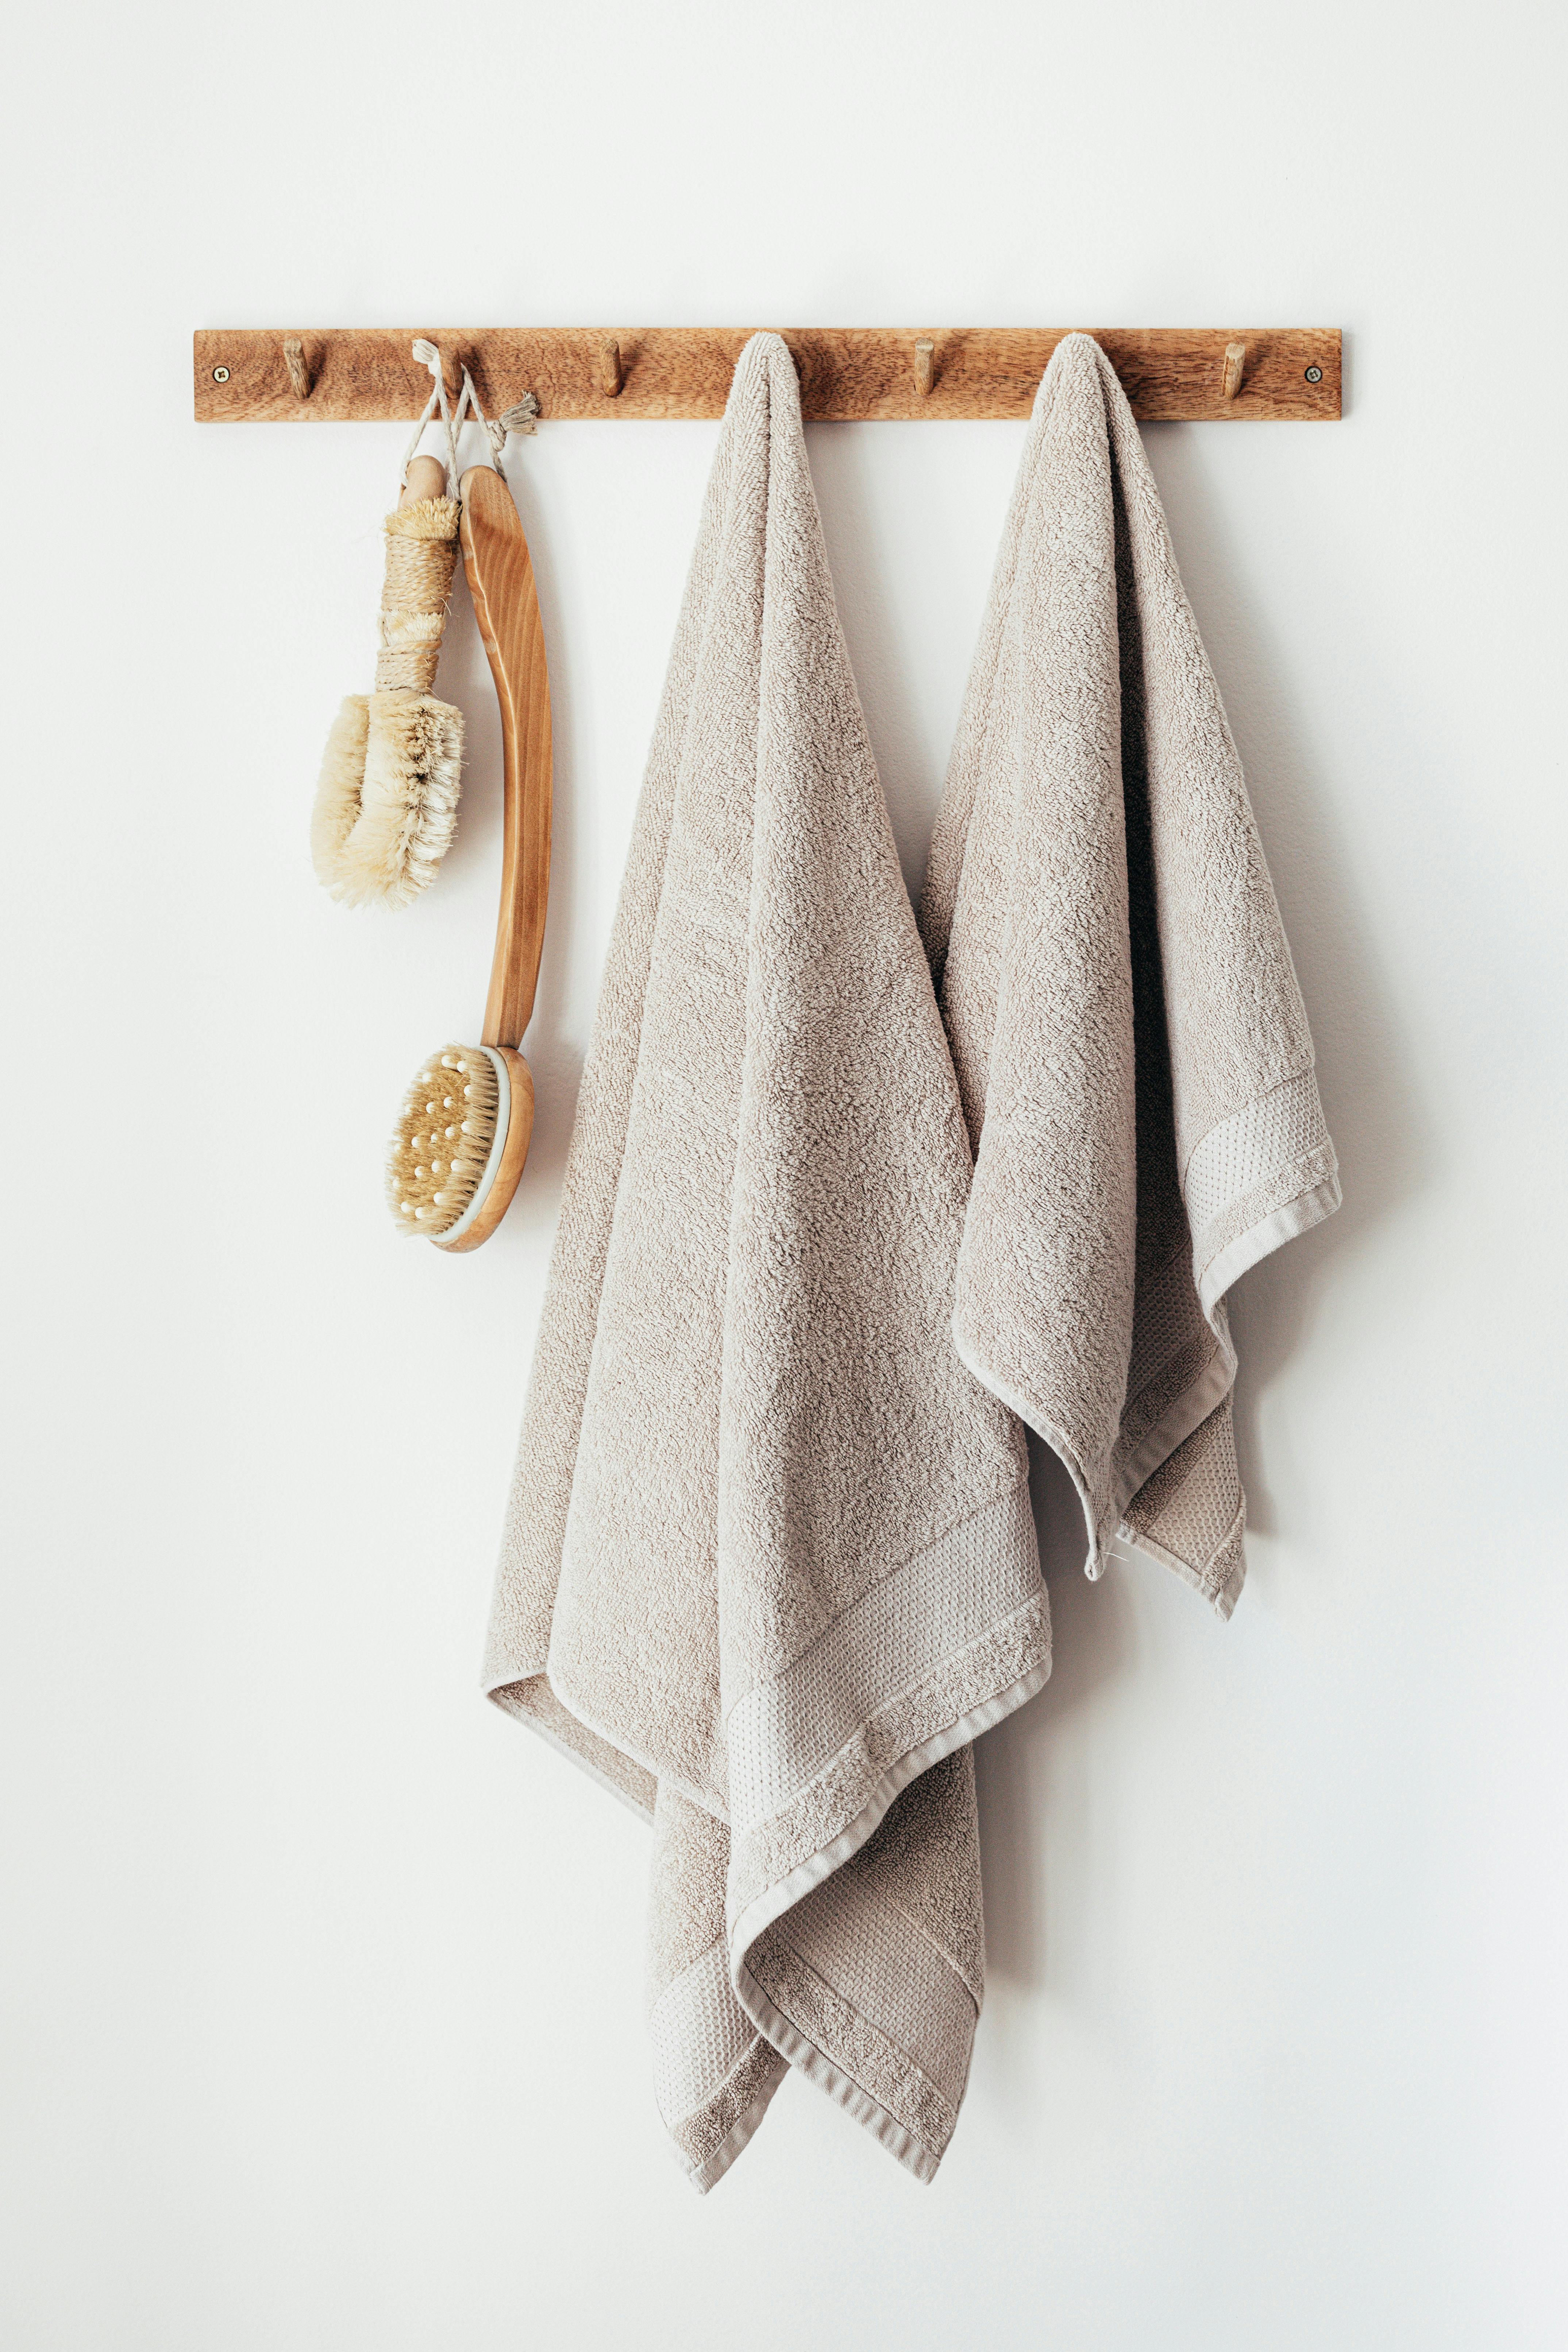 Wooden hanger with towels and body brushes